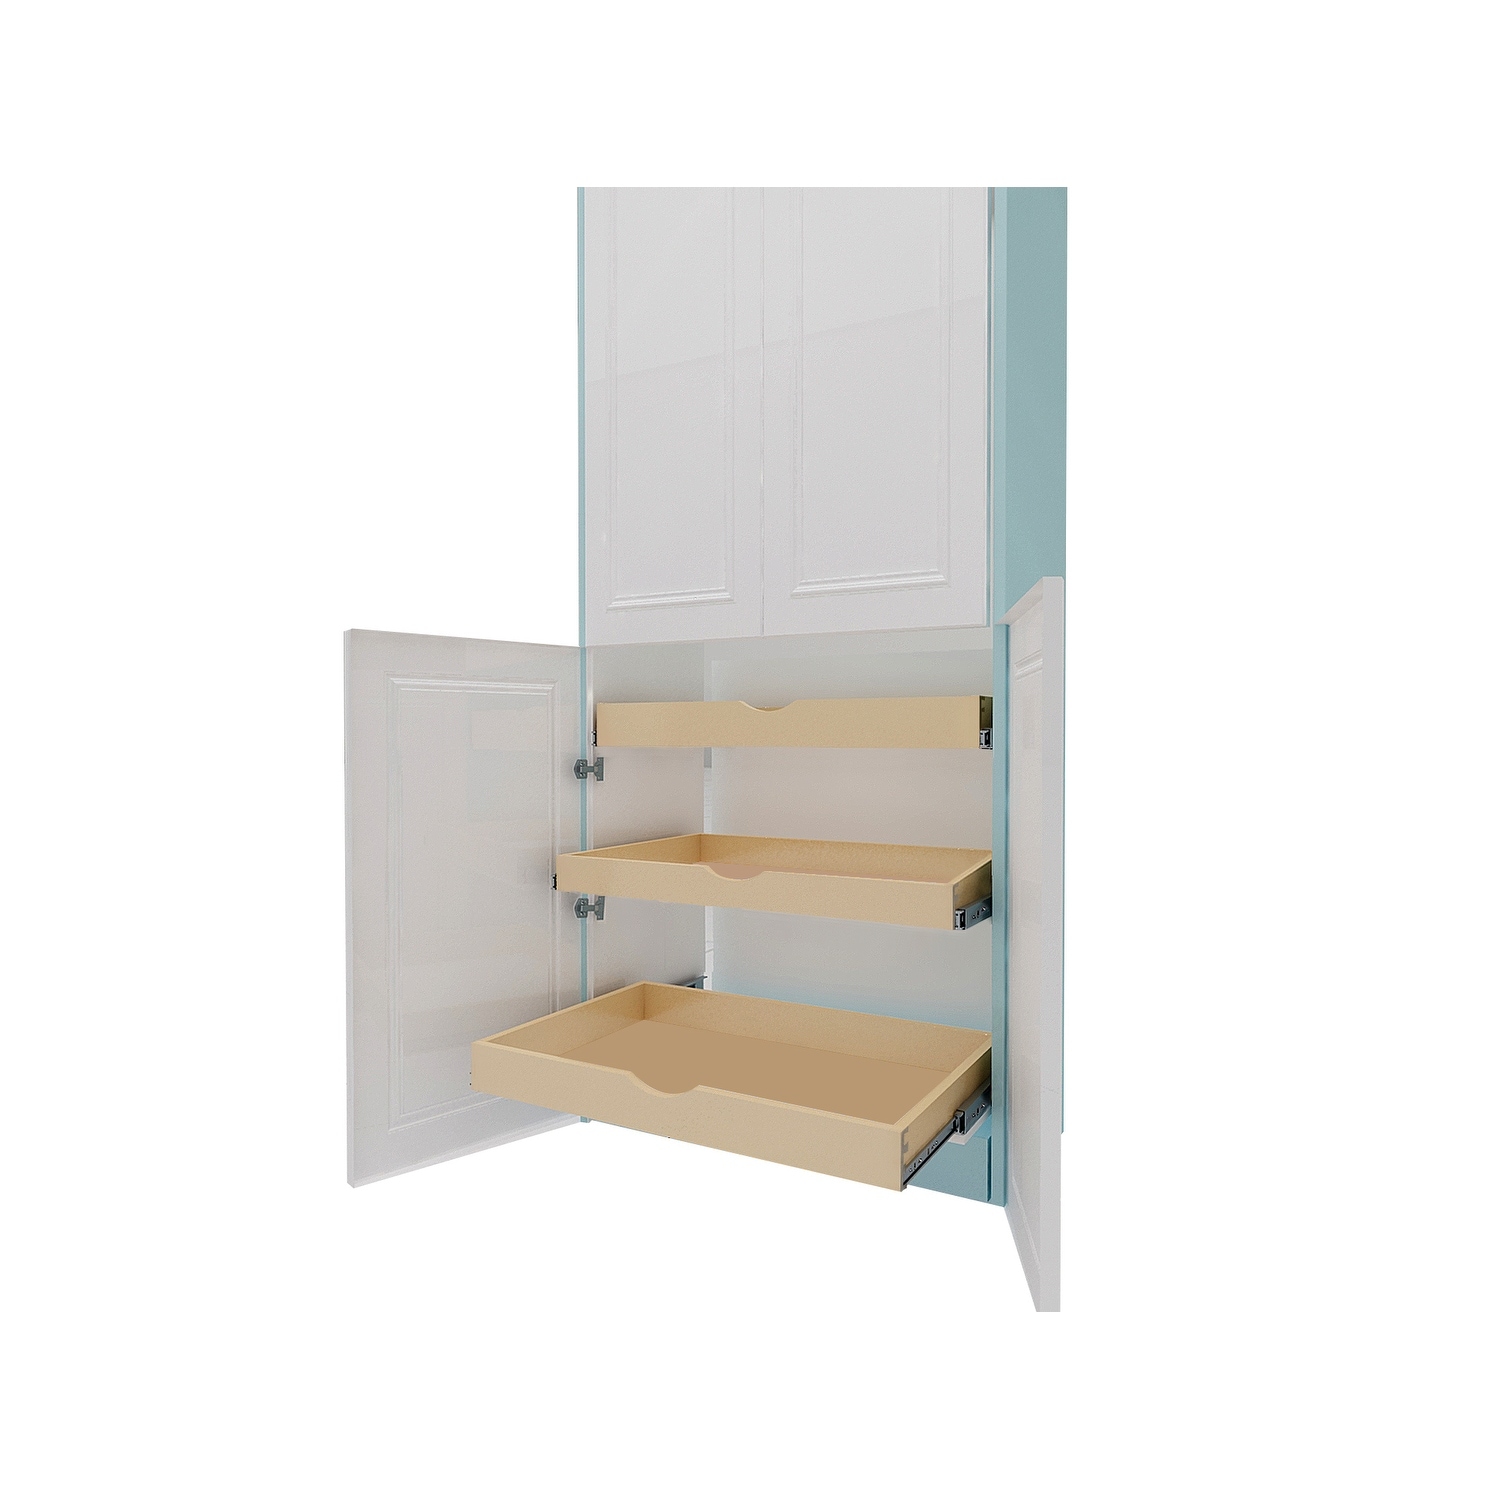 CabinetRTA DIY Slide Out Cabinet Shelf Pull-Out Wood Drawer Storage - Bed  Bath & Beyond - 33787453